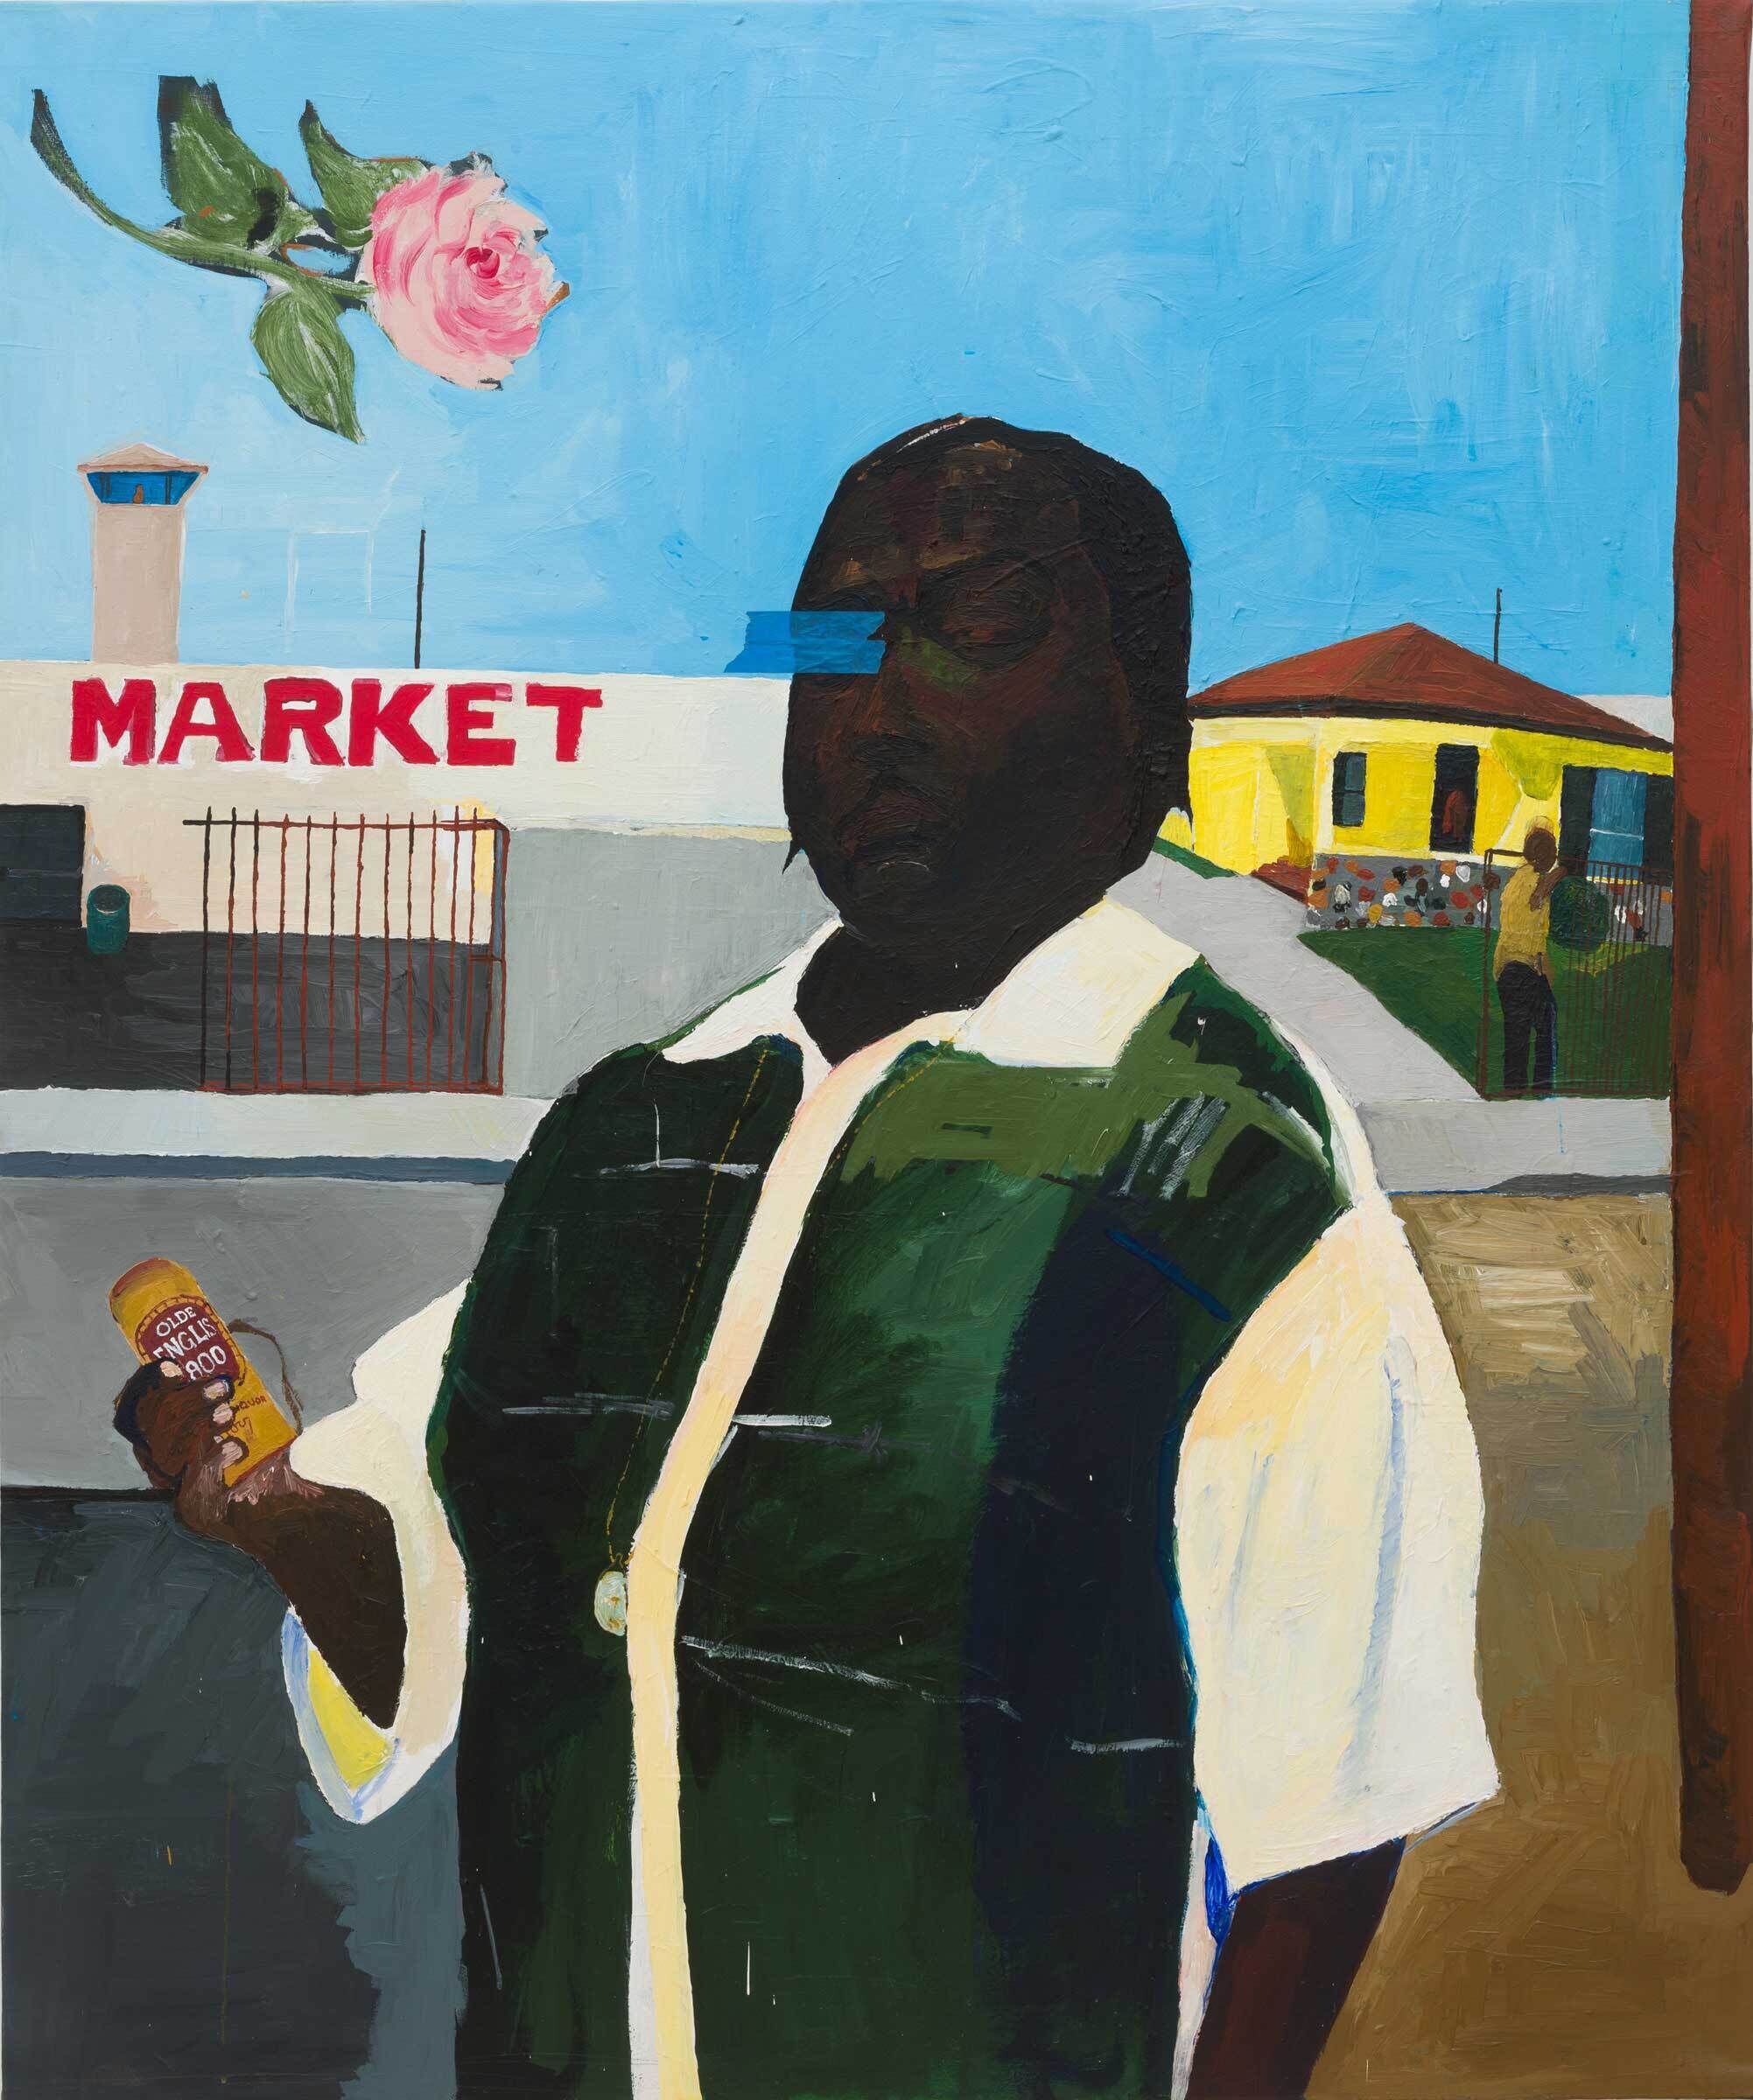 A darkskinned figure wearing a deep green vest and white collared shirt holds a beverage with their right hand. They appear to be standing on a neighborhood block. Behind them to the left is a building with the word "MARKET" written on it, and to the left is a yellow house with a front lawn. On the top left corner, against the background of a pale blue sky, is a singular pink rose.